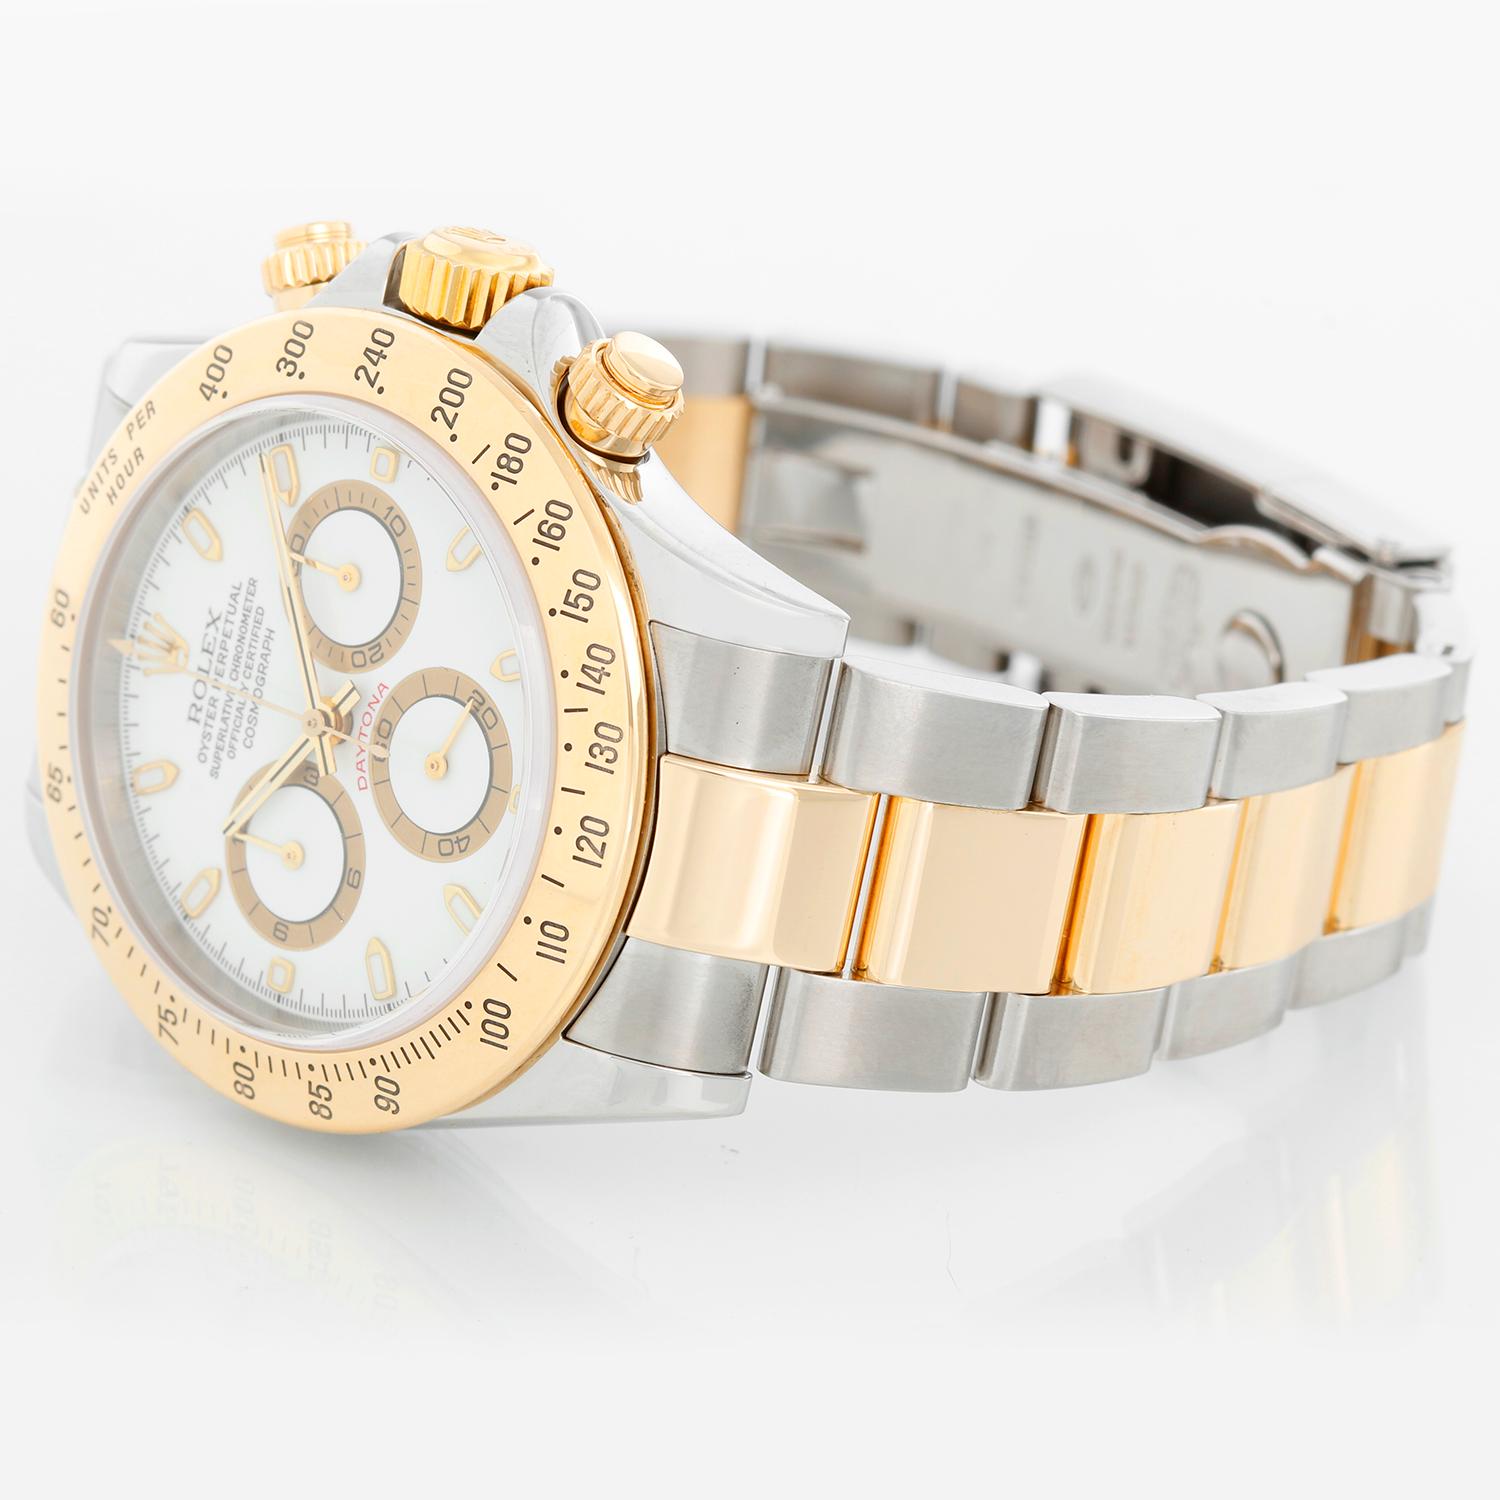 Rolex Cosmograph Daytona Men's Watch 116523 - Automatic winding, chronograph, 44 jewels, sapphire crystal. Stainless steel case with 18k yellow gold bezel. White dial with luminous-style markers. Stainless steel and 18k yellow gold Oyster bracelet